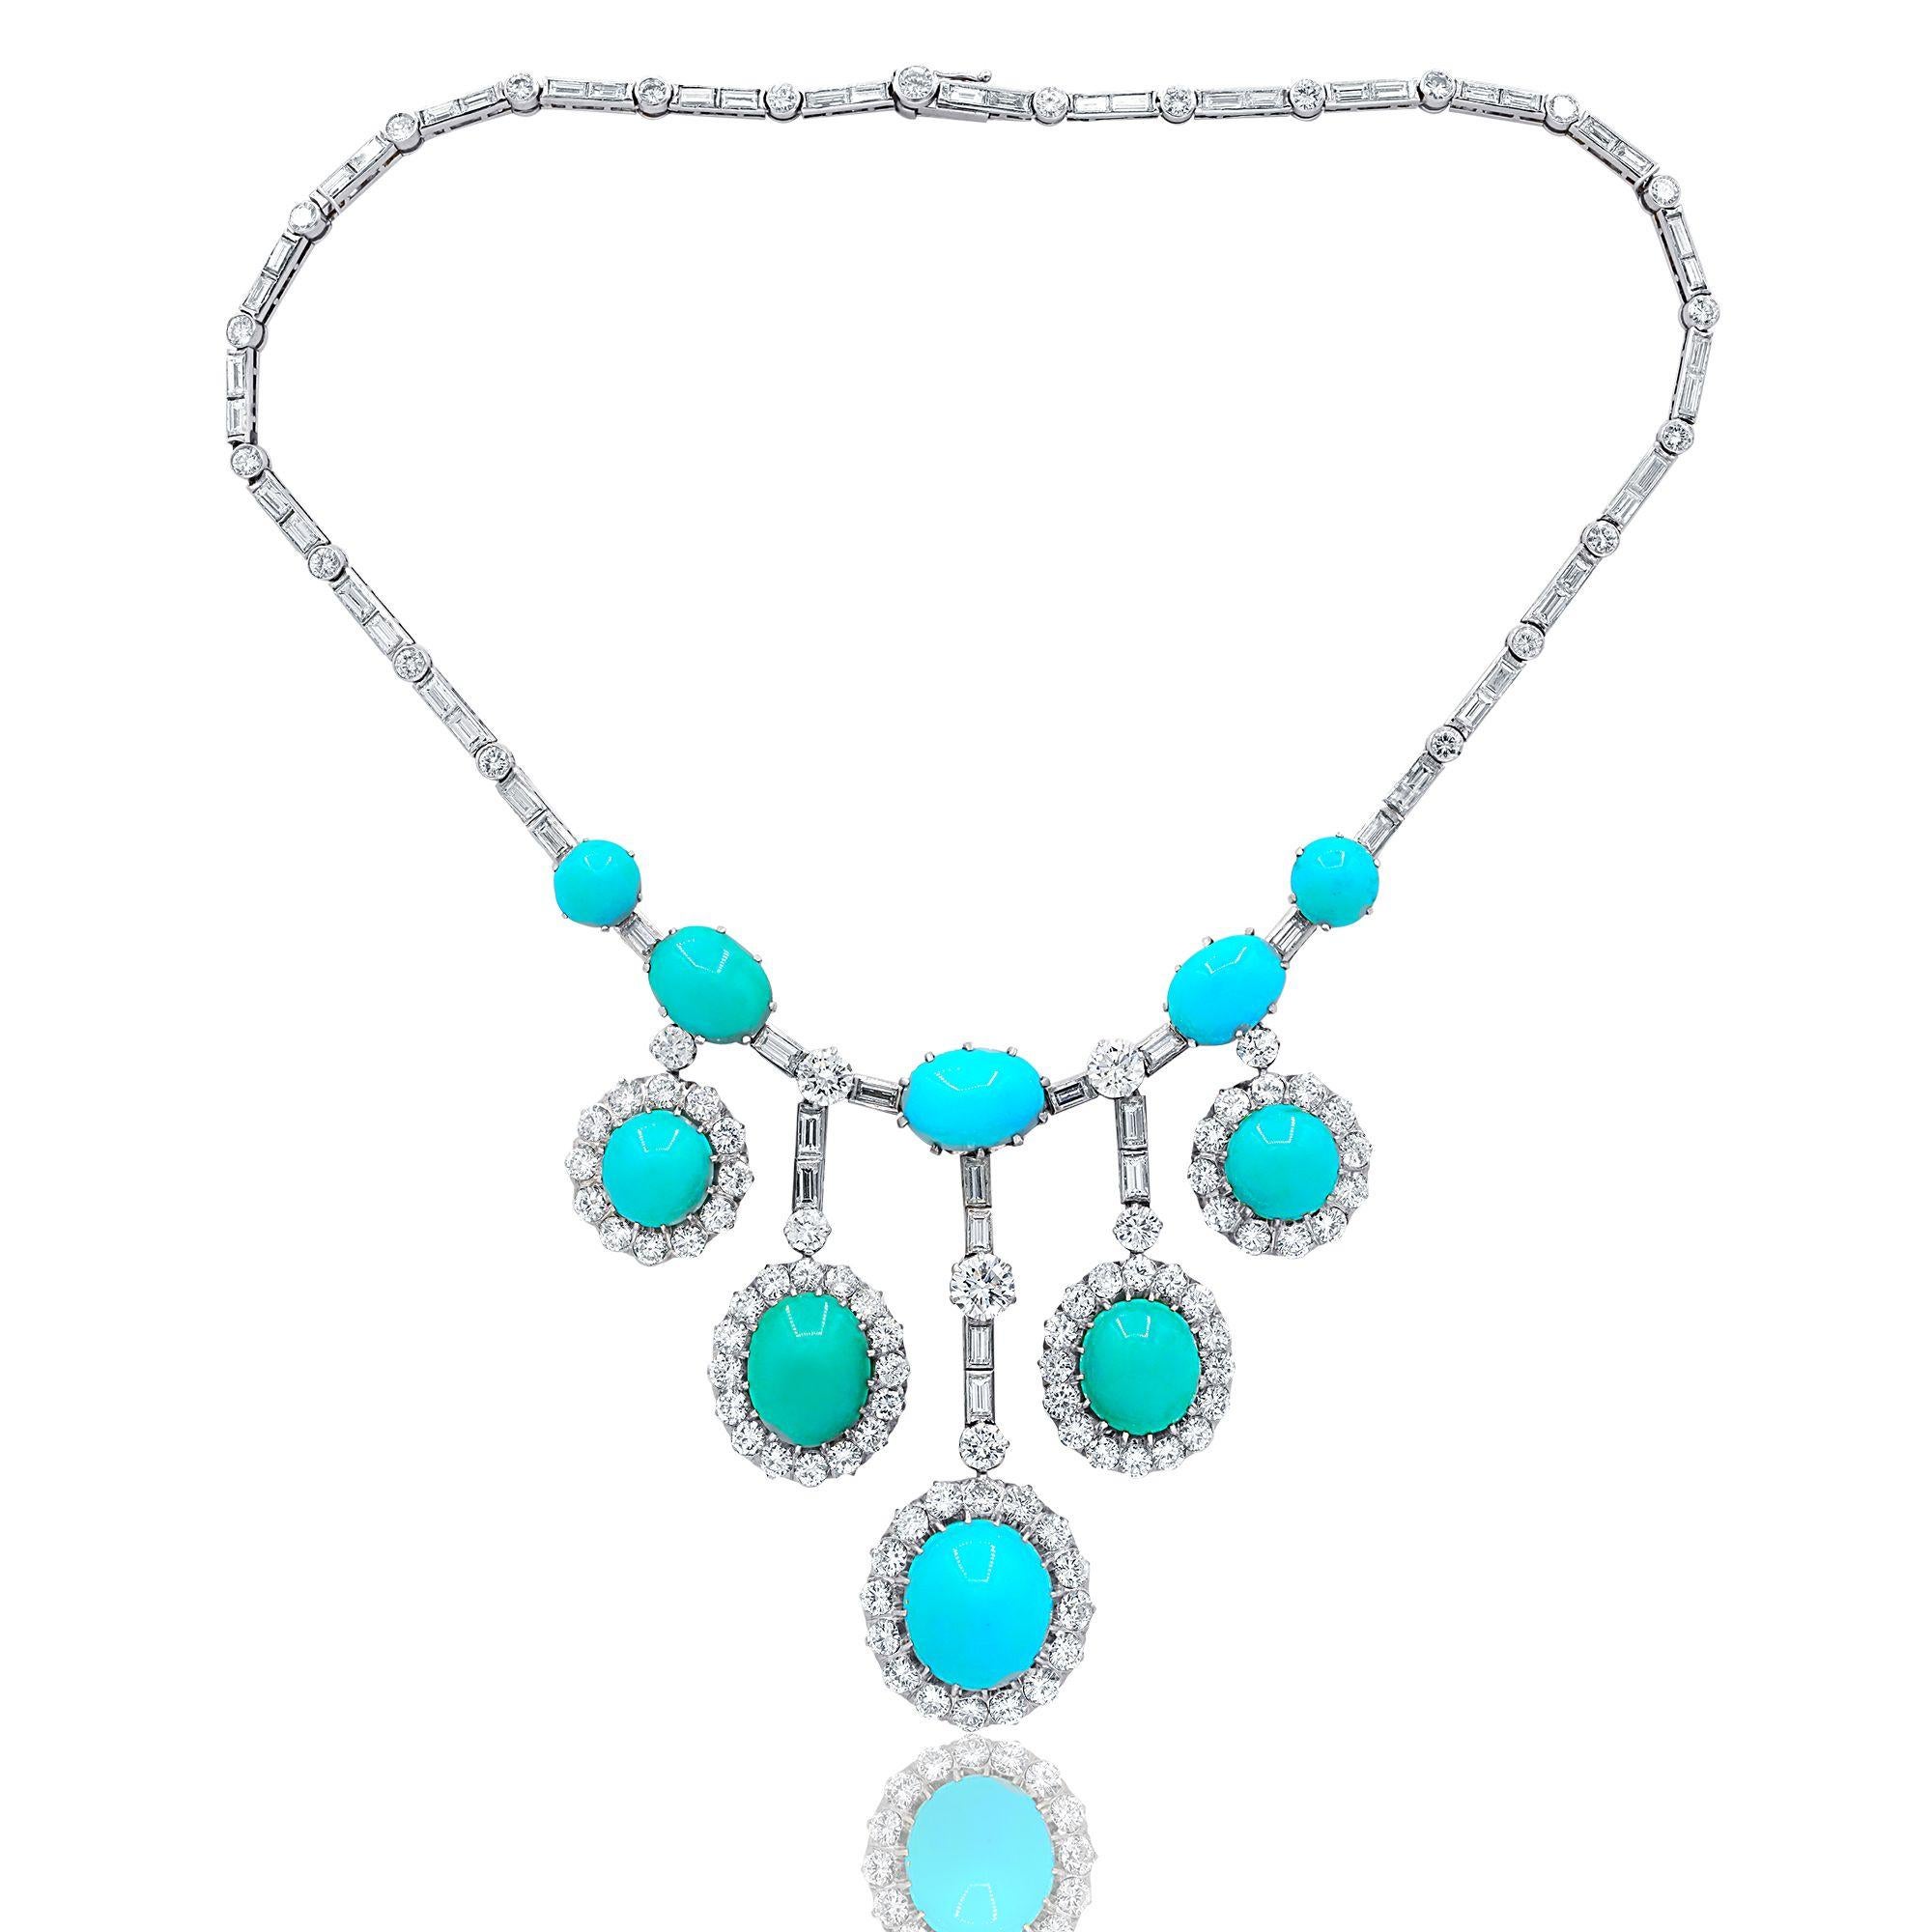 One of a Kind Turquoise and Diamond Necklace features 28 carats of important size old miner diamonds, with approximately 84 carats of turquoises. 